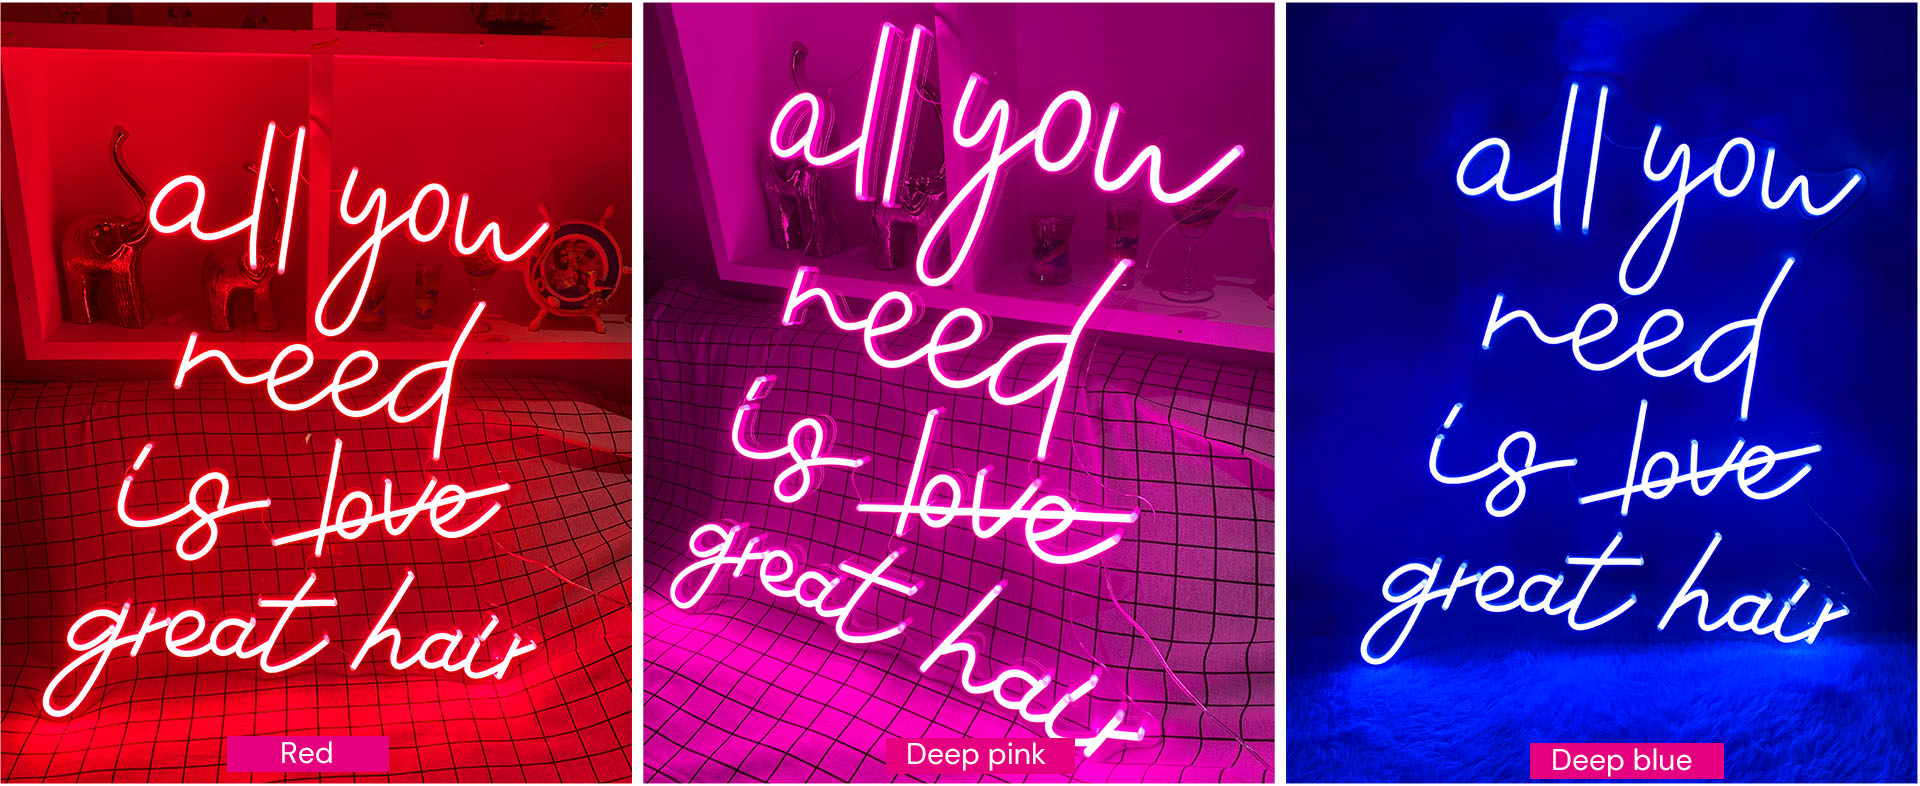 All you need is love great hair neon